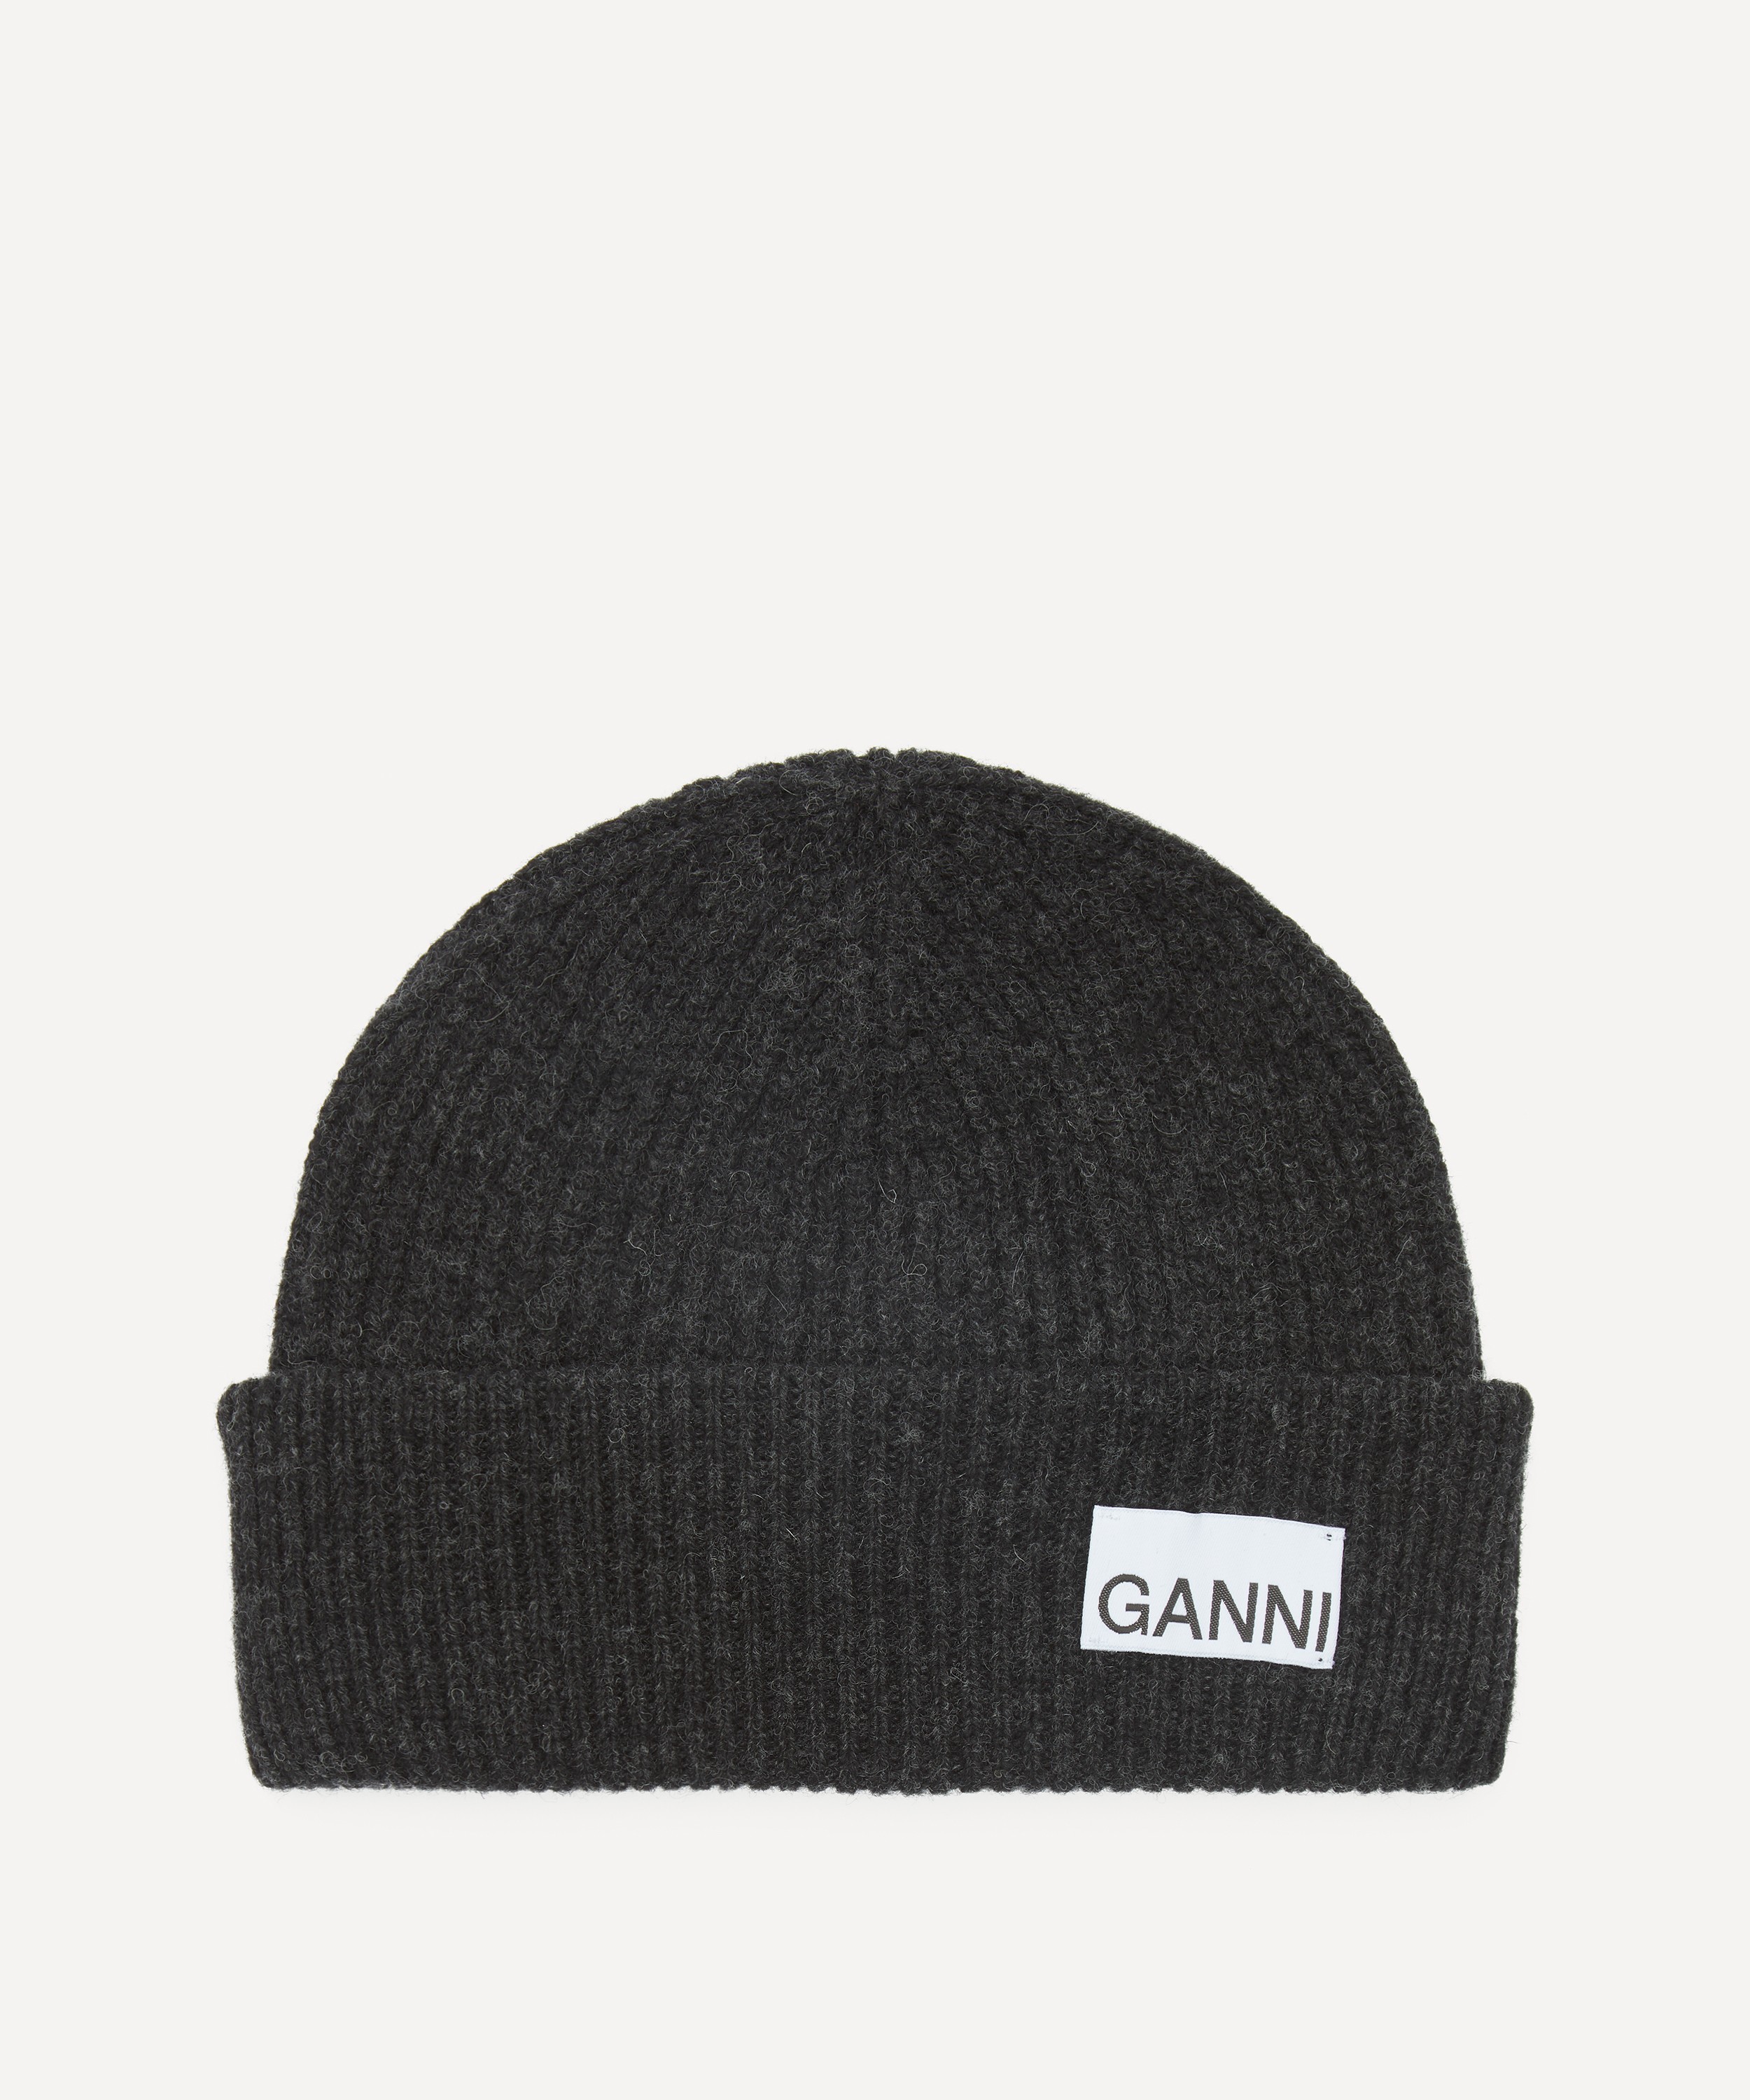 Ganni - Ribbed Knit Beanie image number 0